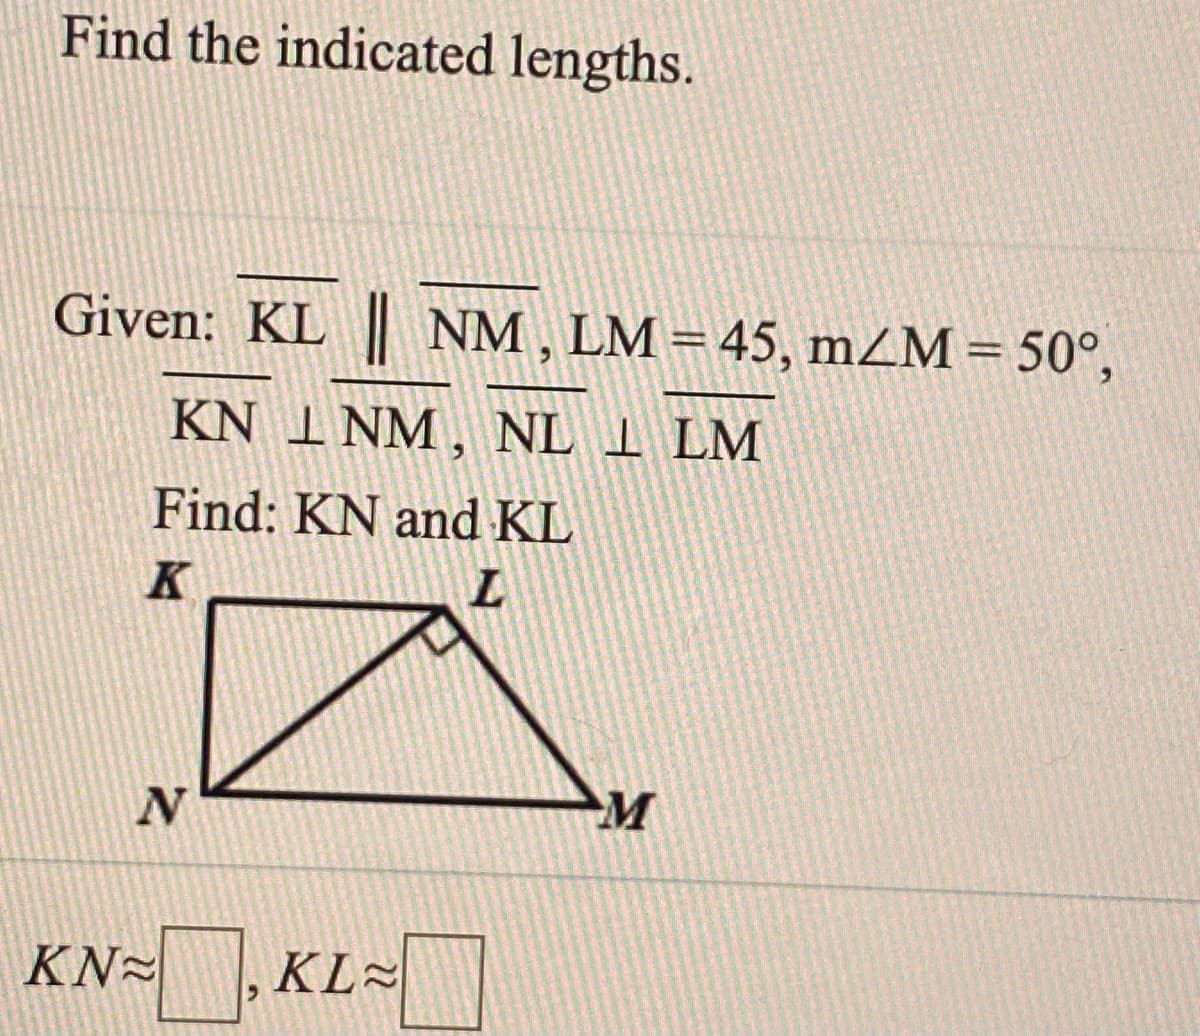 Find the indicated lengths.
Given: KL NM, LM=45, mZM=50°,
%3D
KN I NM, NL 1 LM
Find: KN and KL
K
L
N
M
KN=KL-
